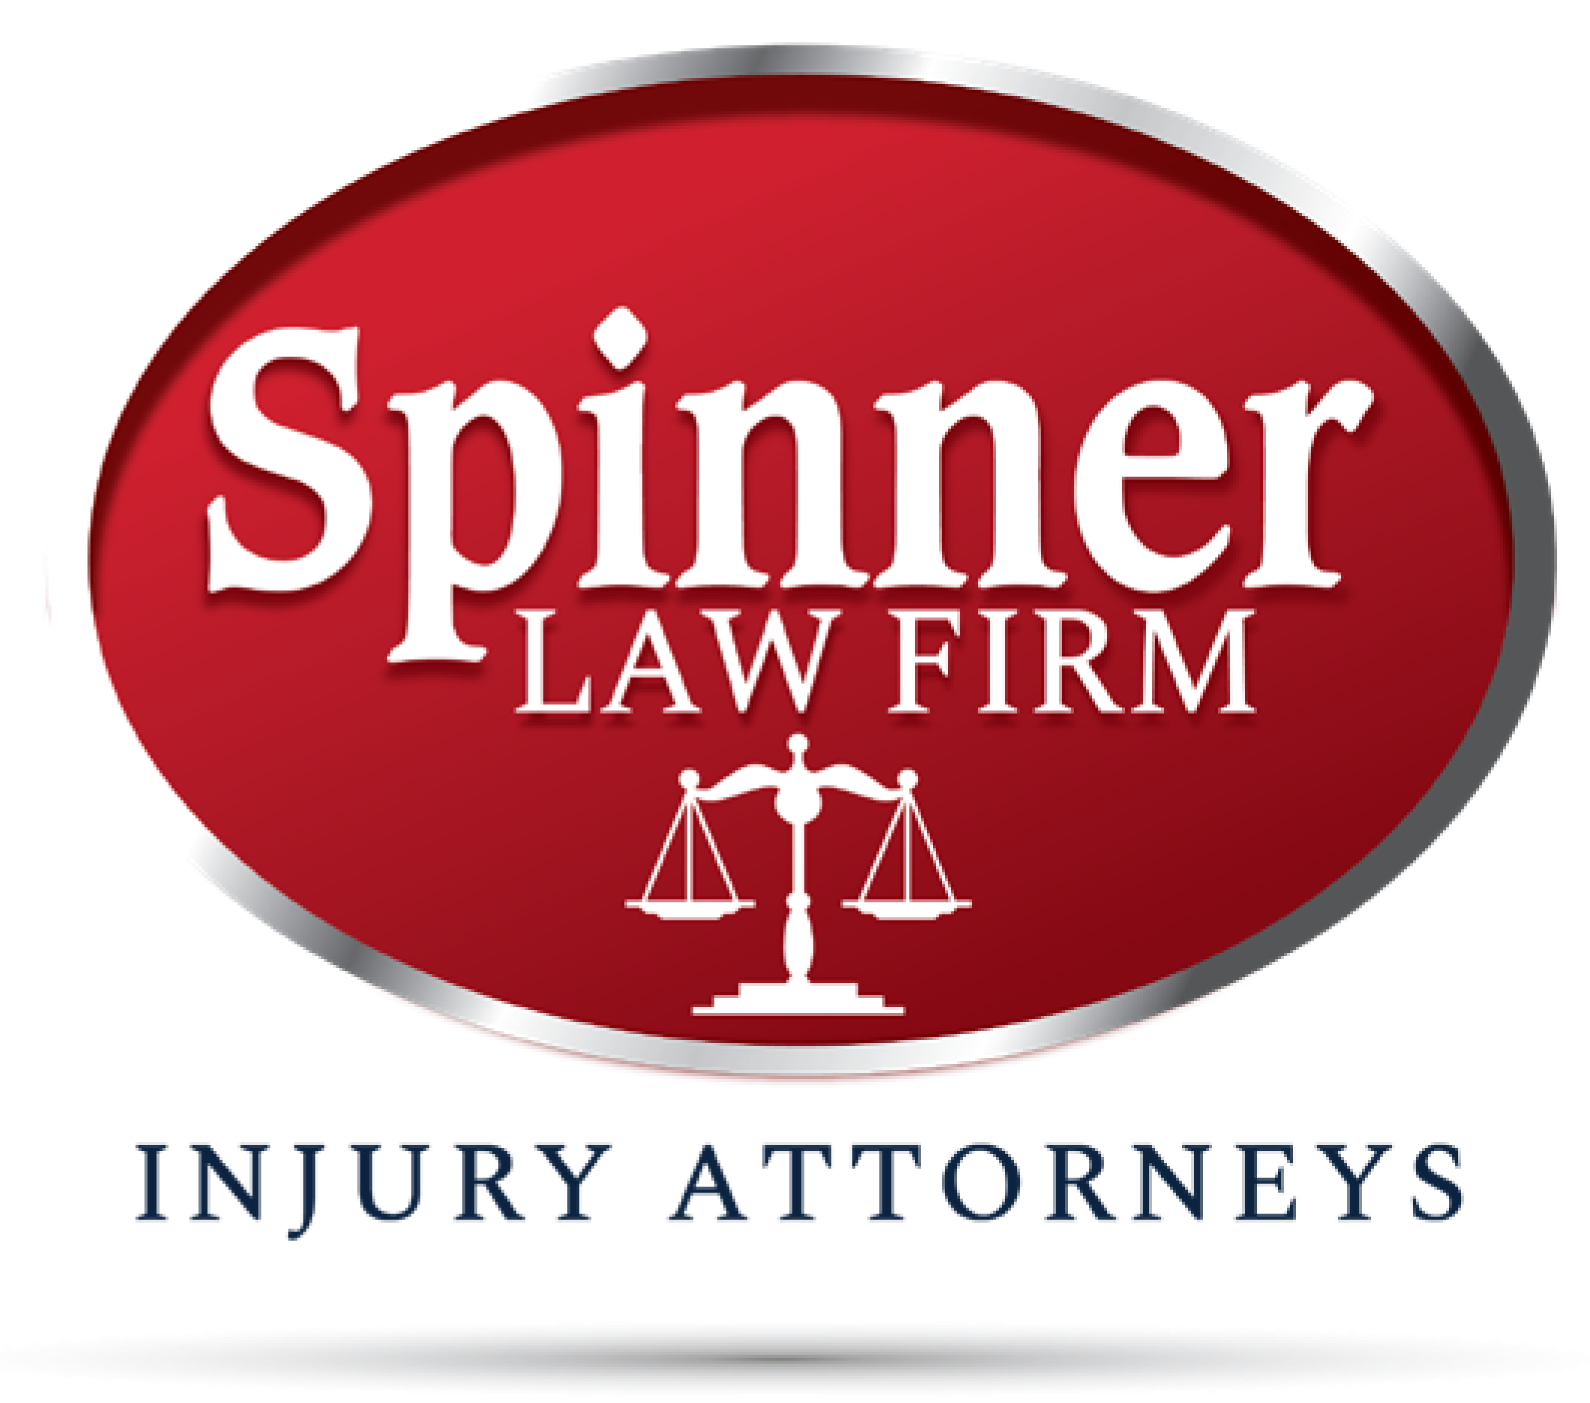 Spinner Law Firm